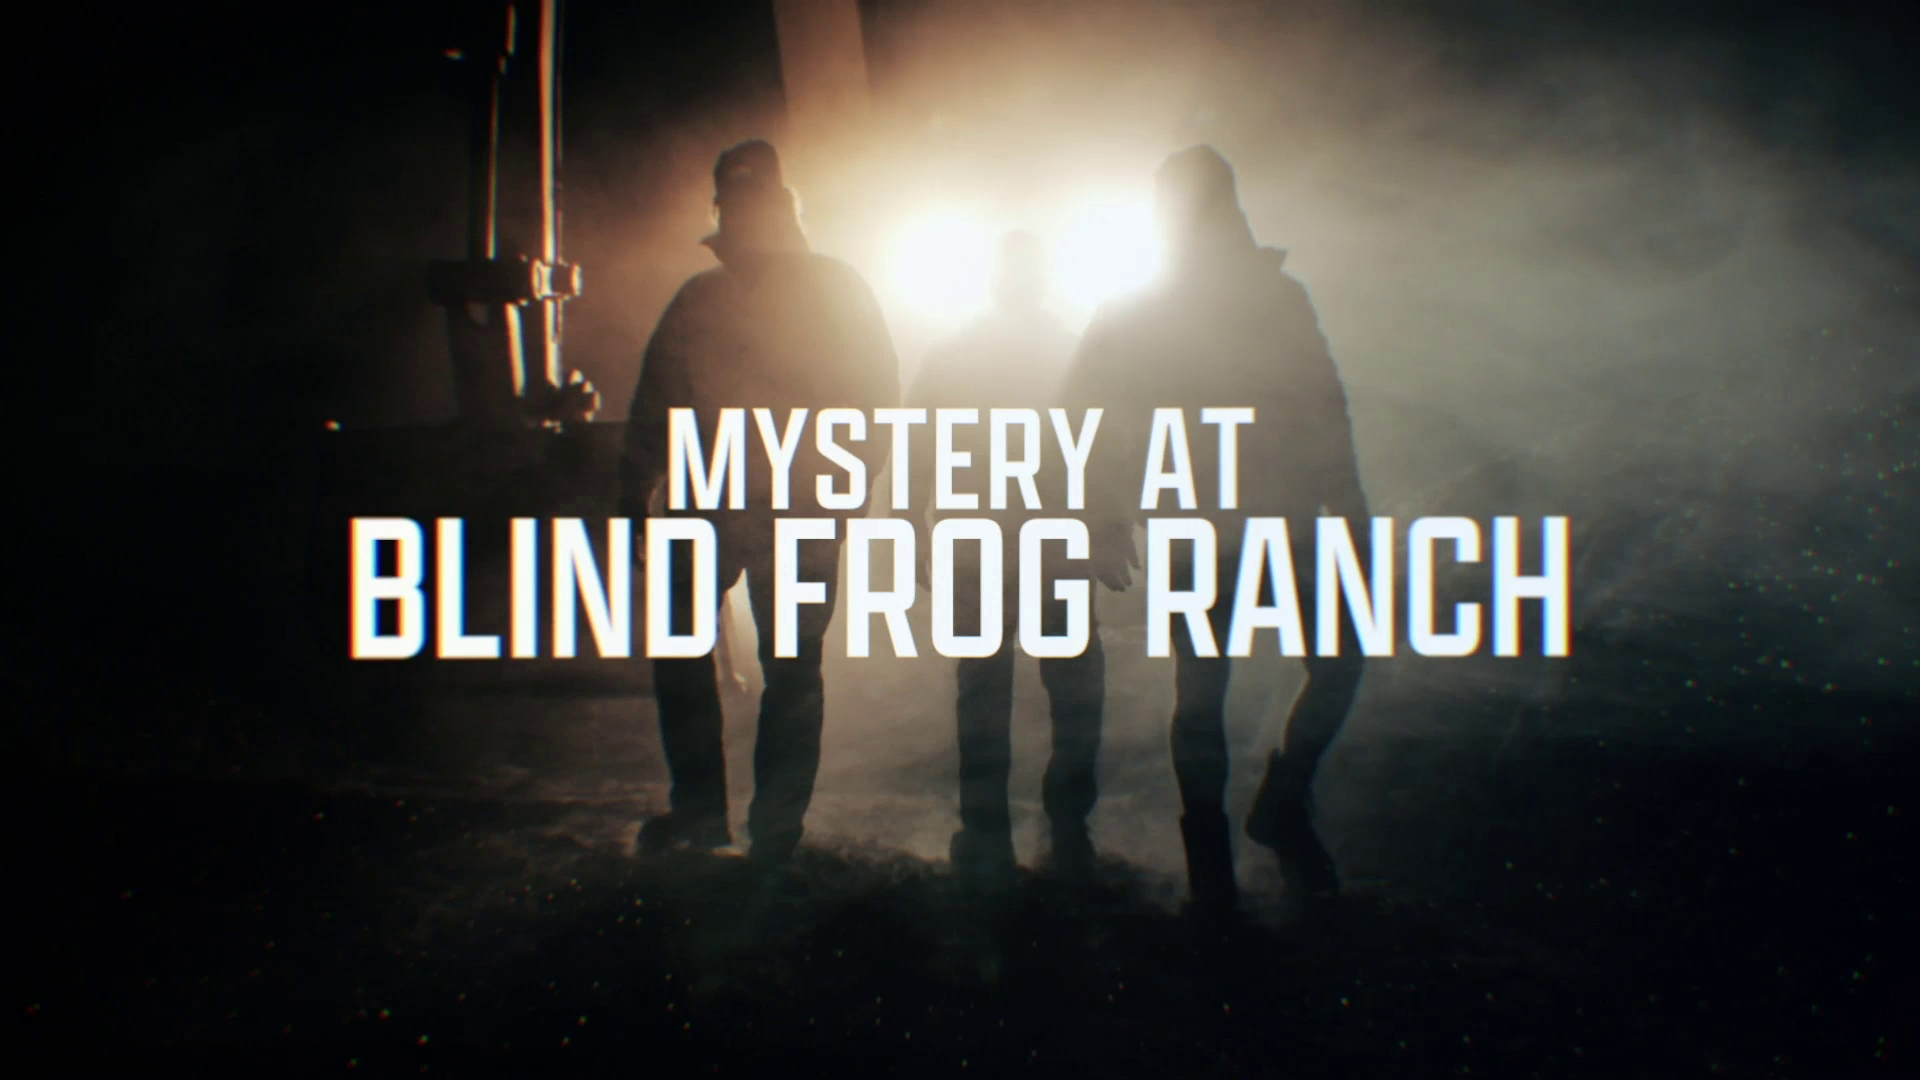 mystery-at-blind-frog-ranch